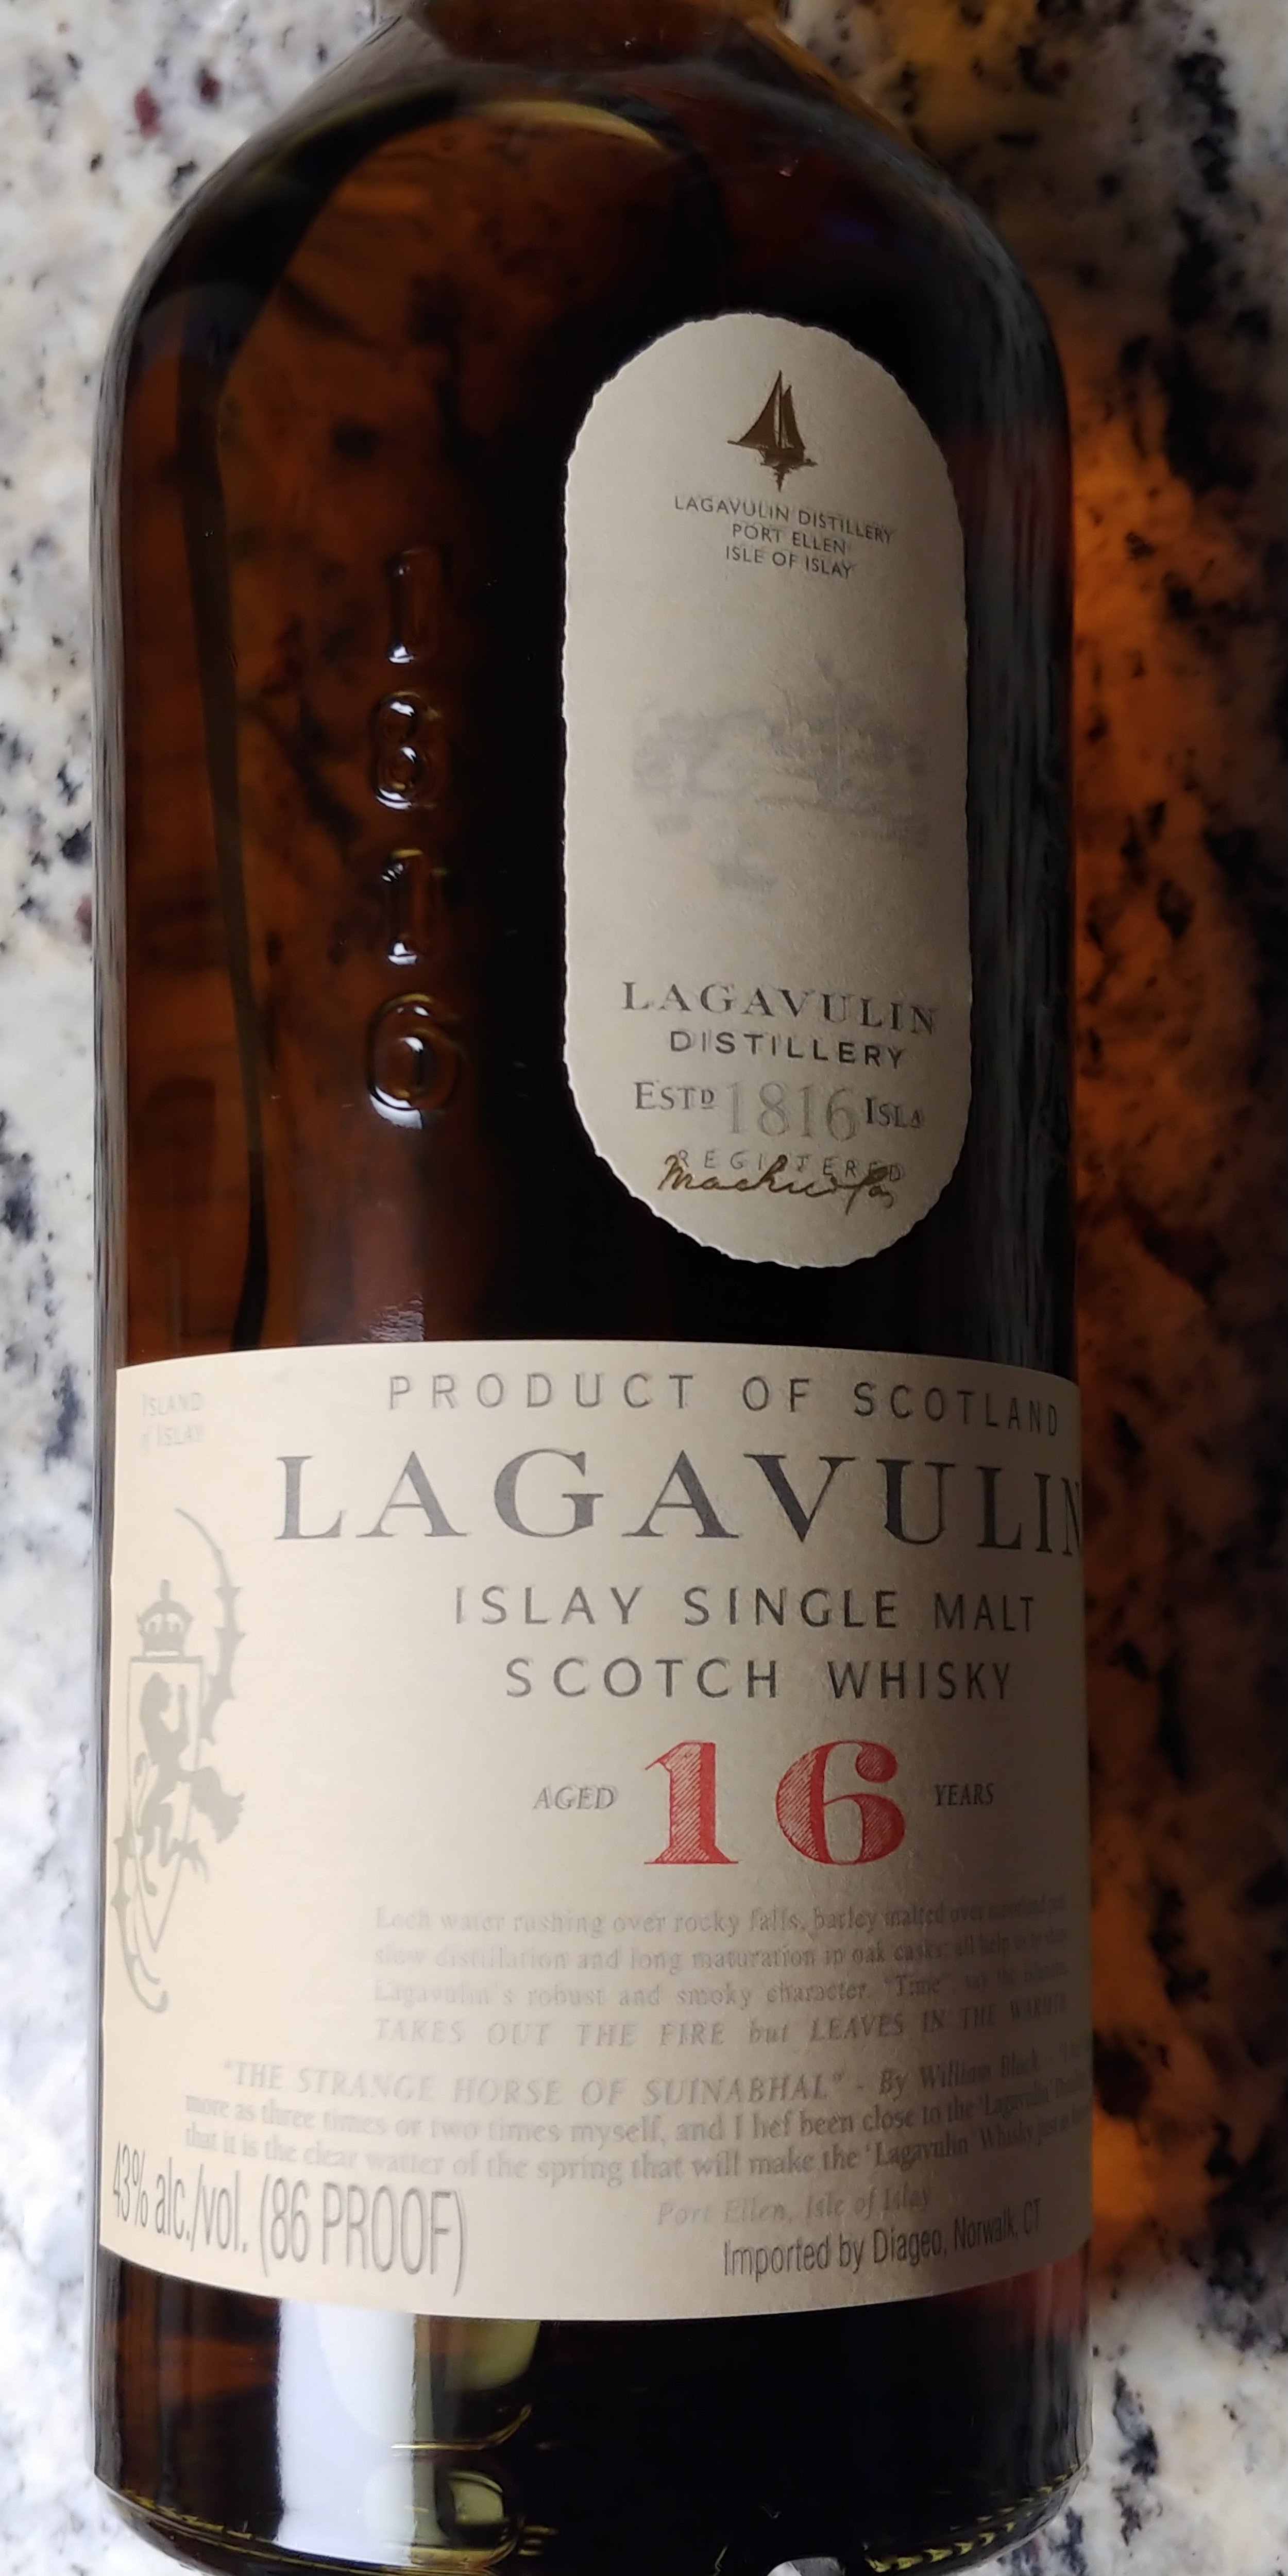 Lagavulin 16 Year Old Review - Scotch & Sounds Whisky Review